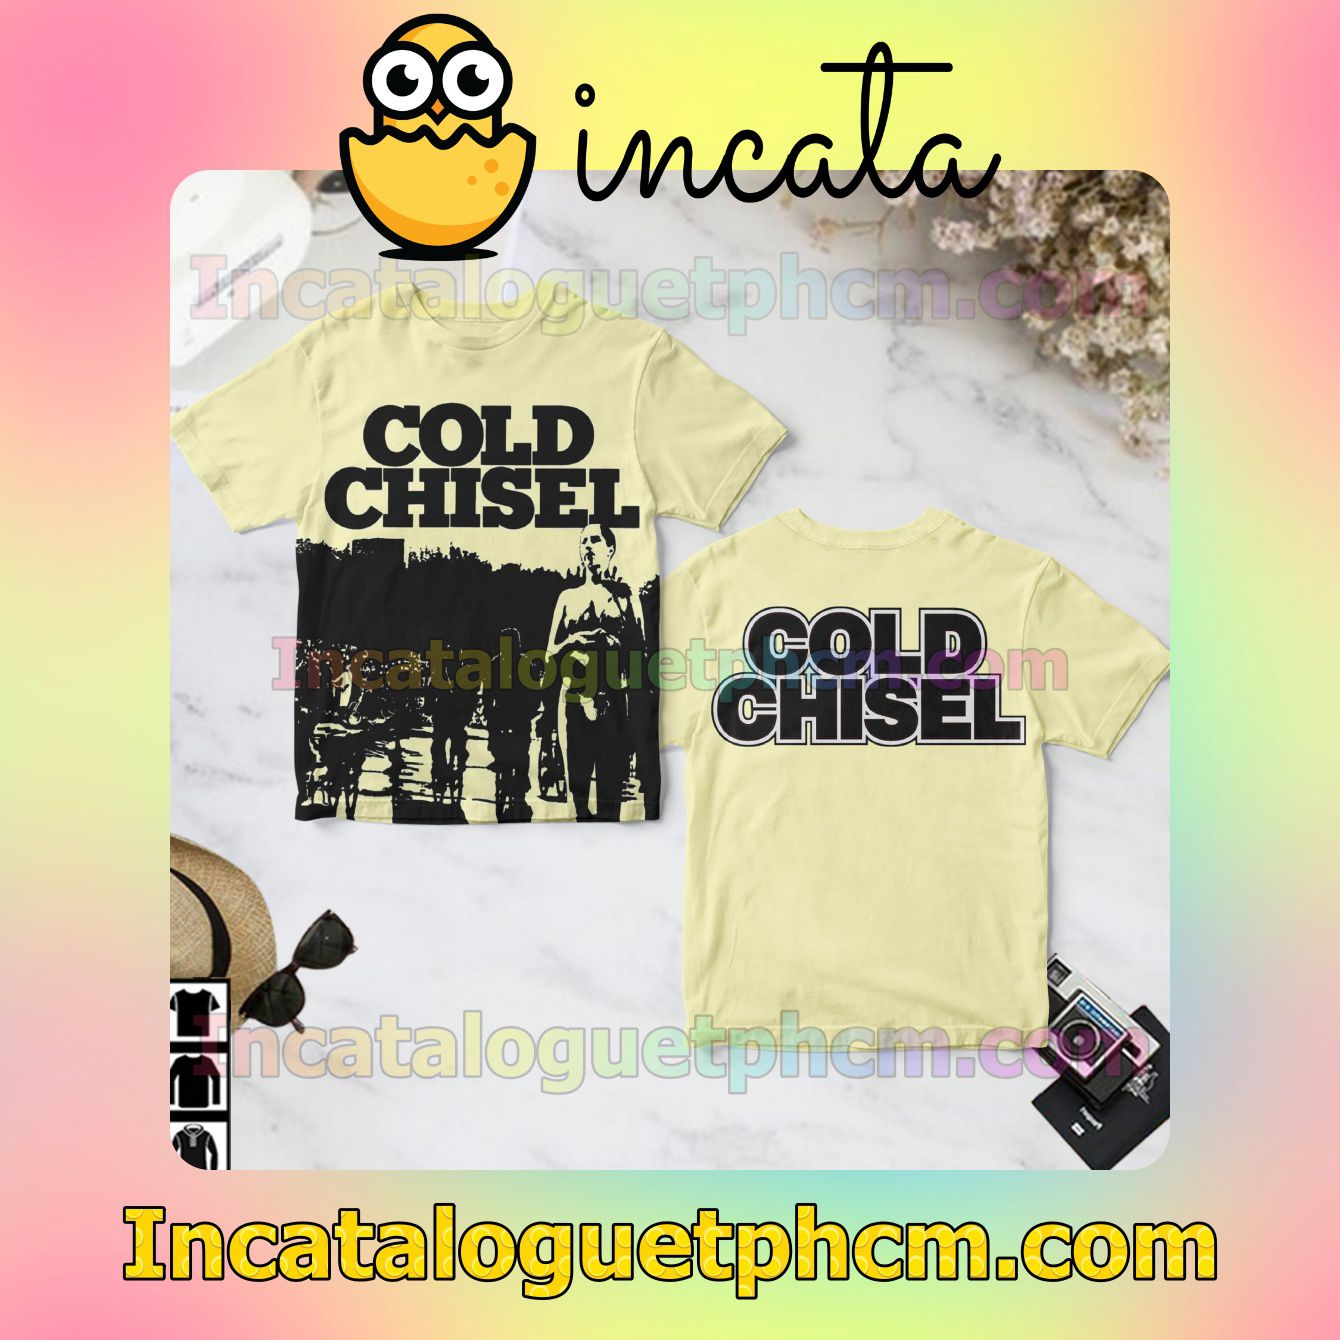 Cold Chisel Self-titled Debut Album Cover Fan Gift Shirt